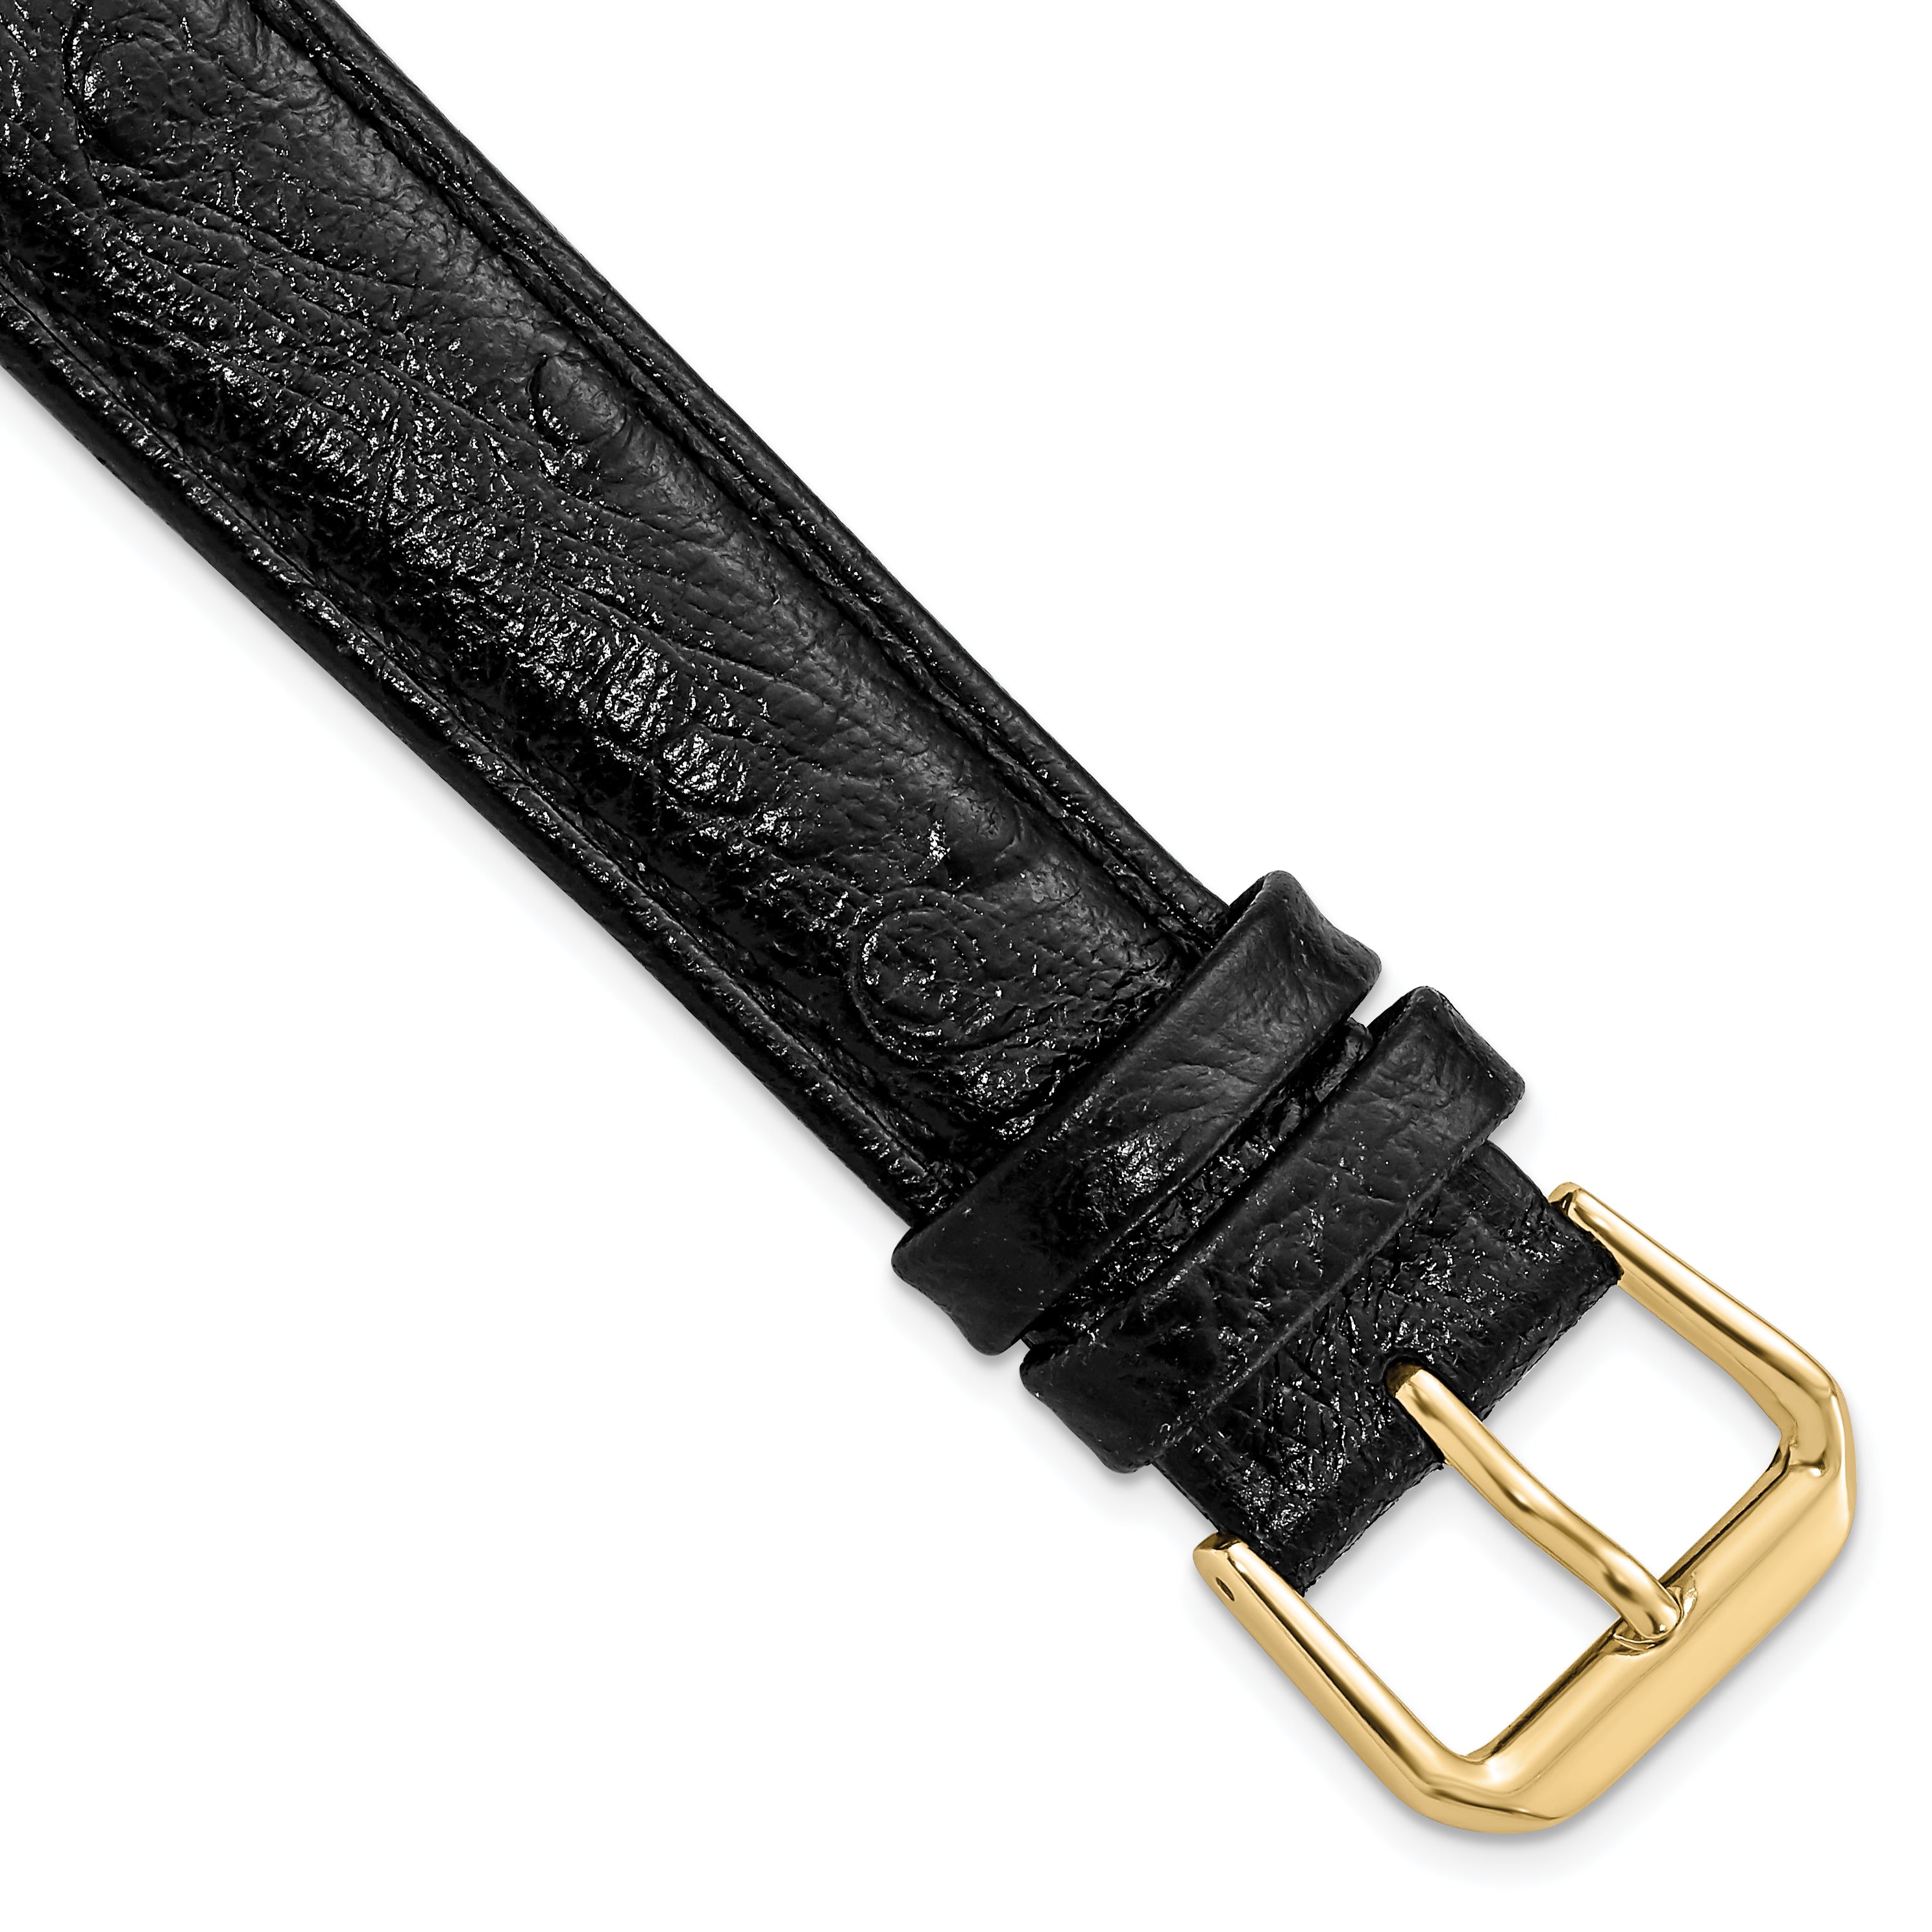 DeBeer 18mm Black Ostrich Grain Leather with Gold-tone Buckle 7.5 inch Watch Band